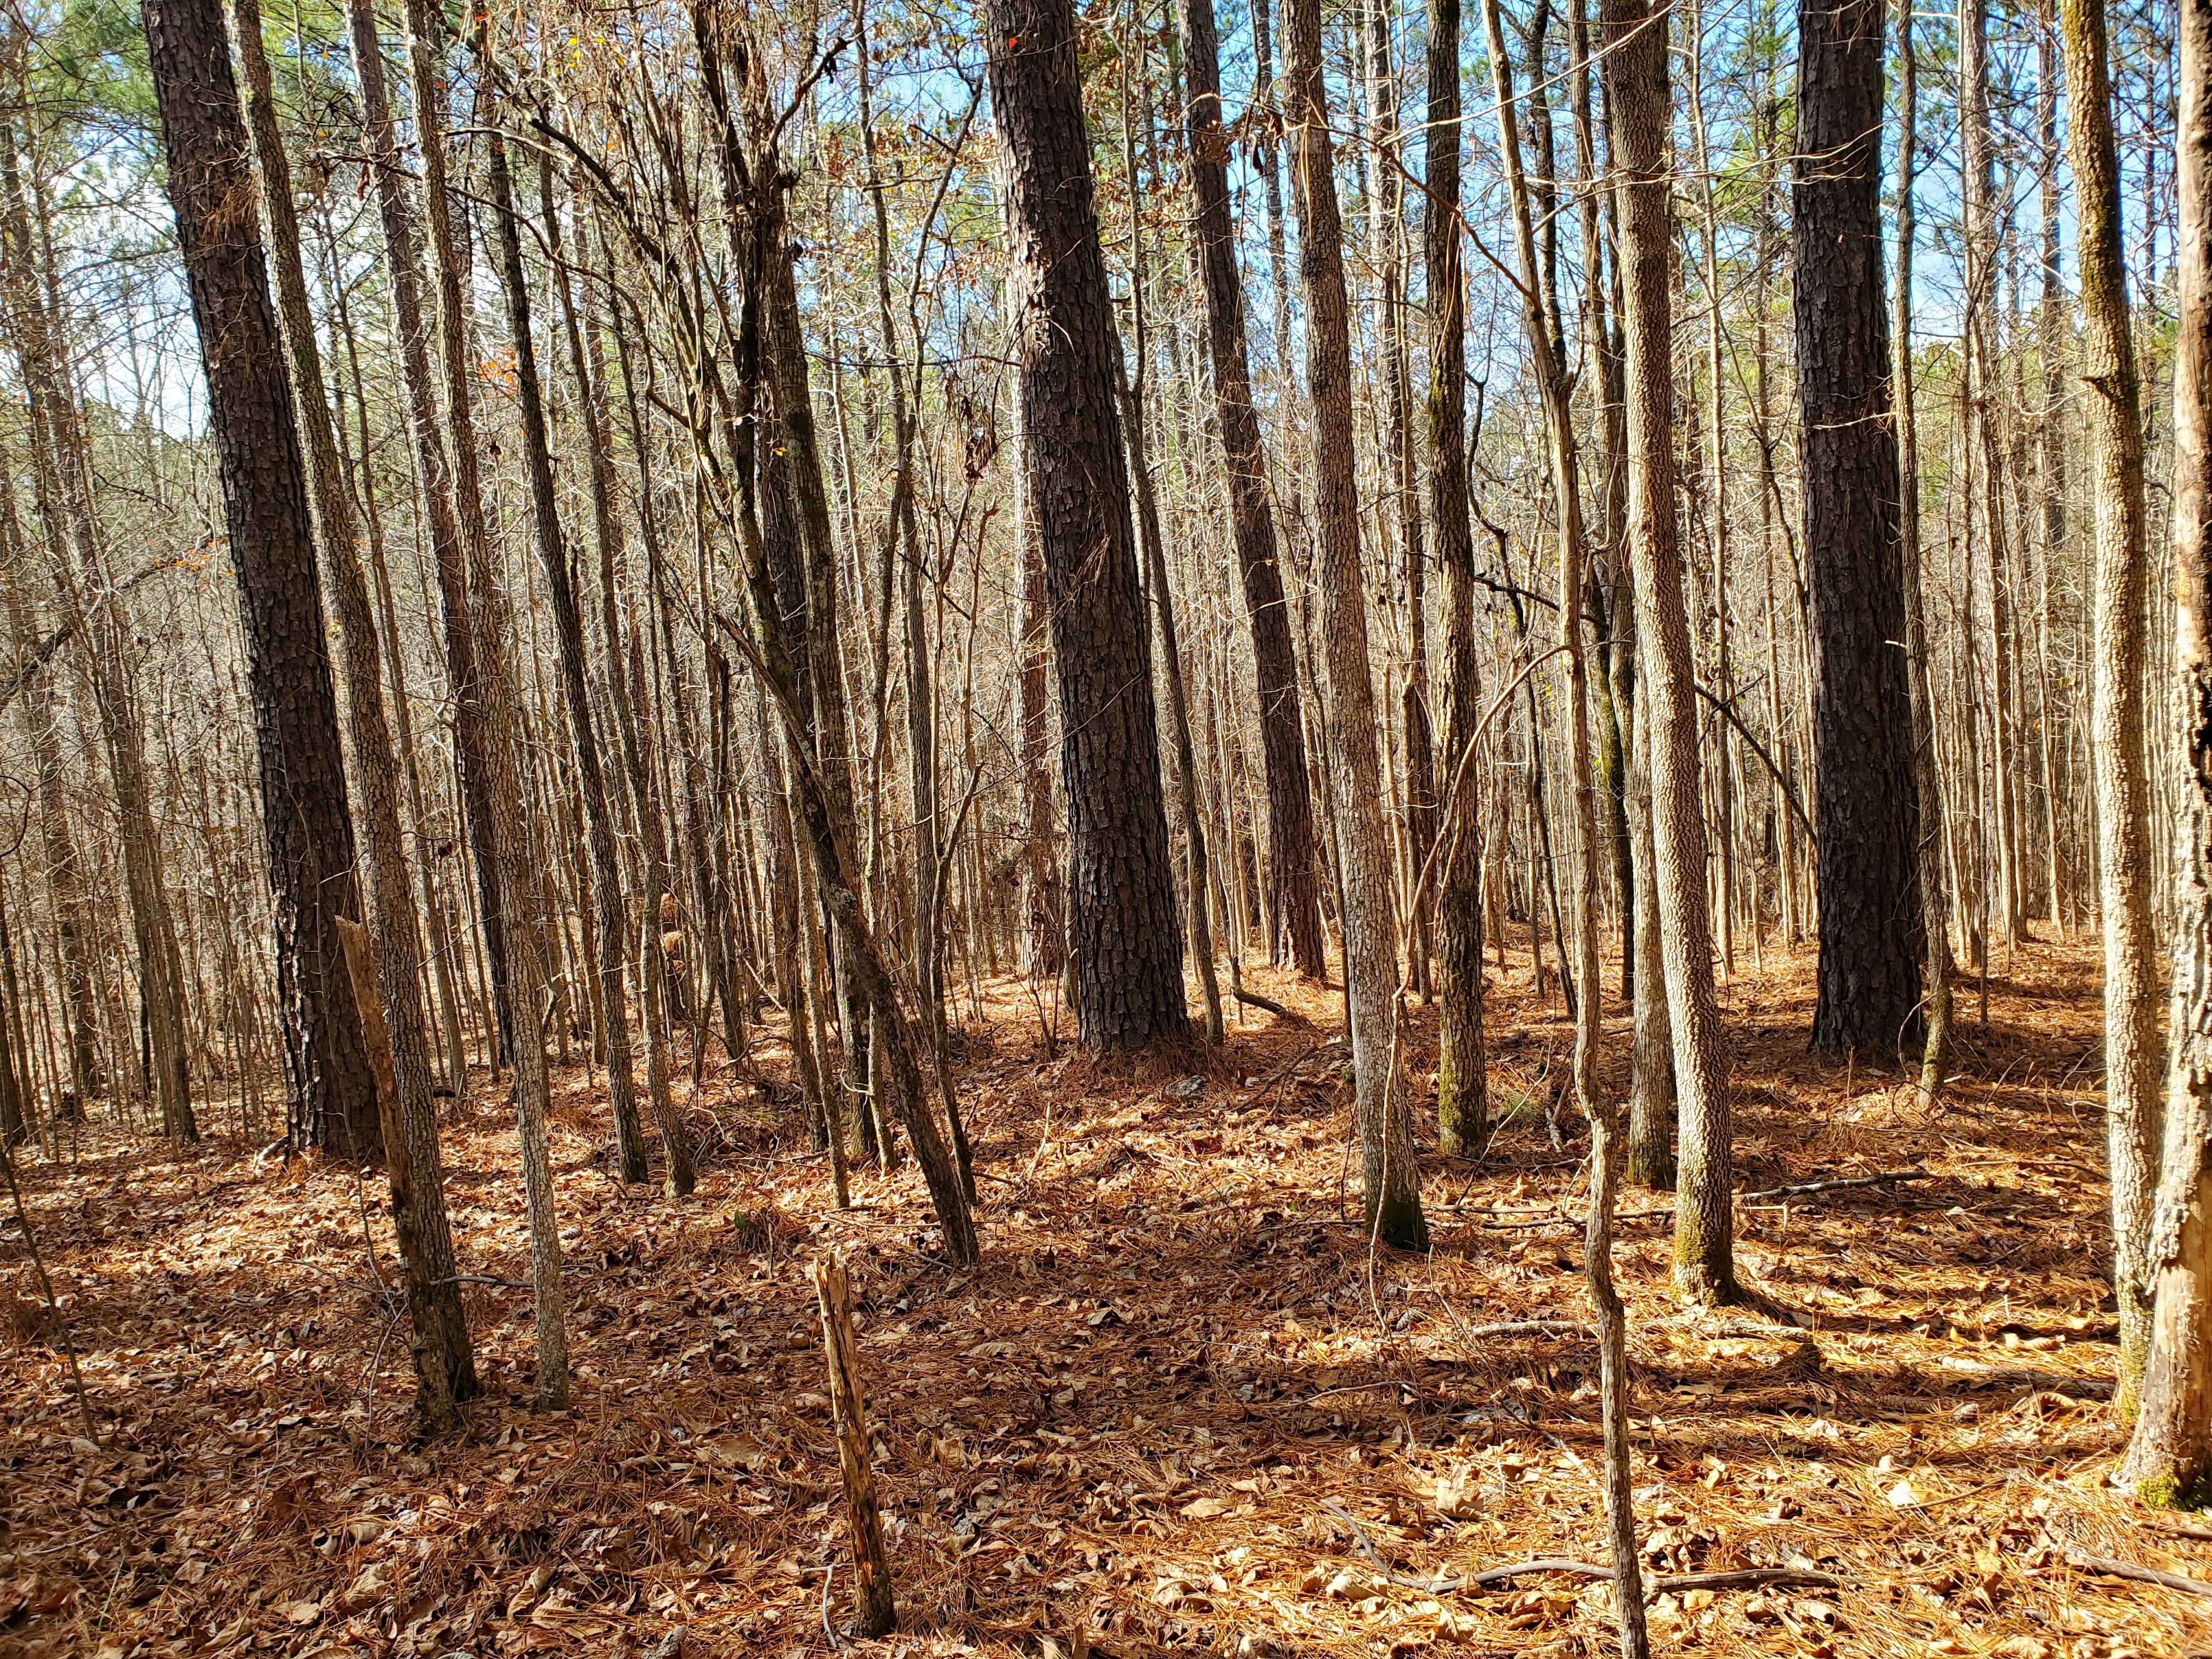 Hardwoods and  Big Loblolly Pines